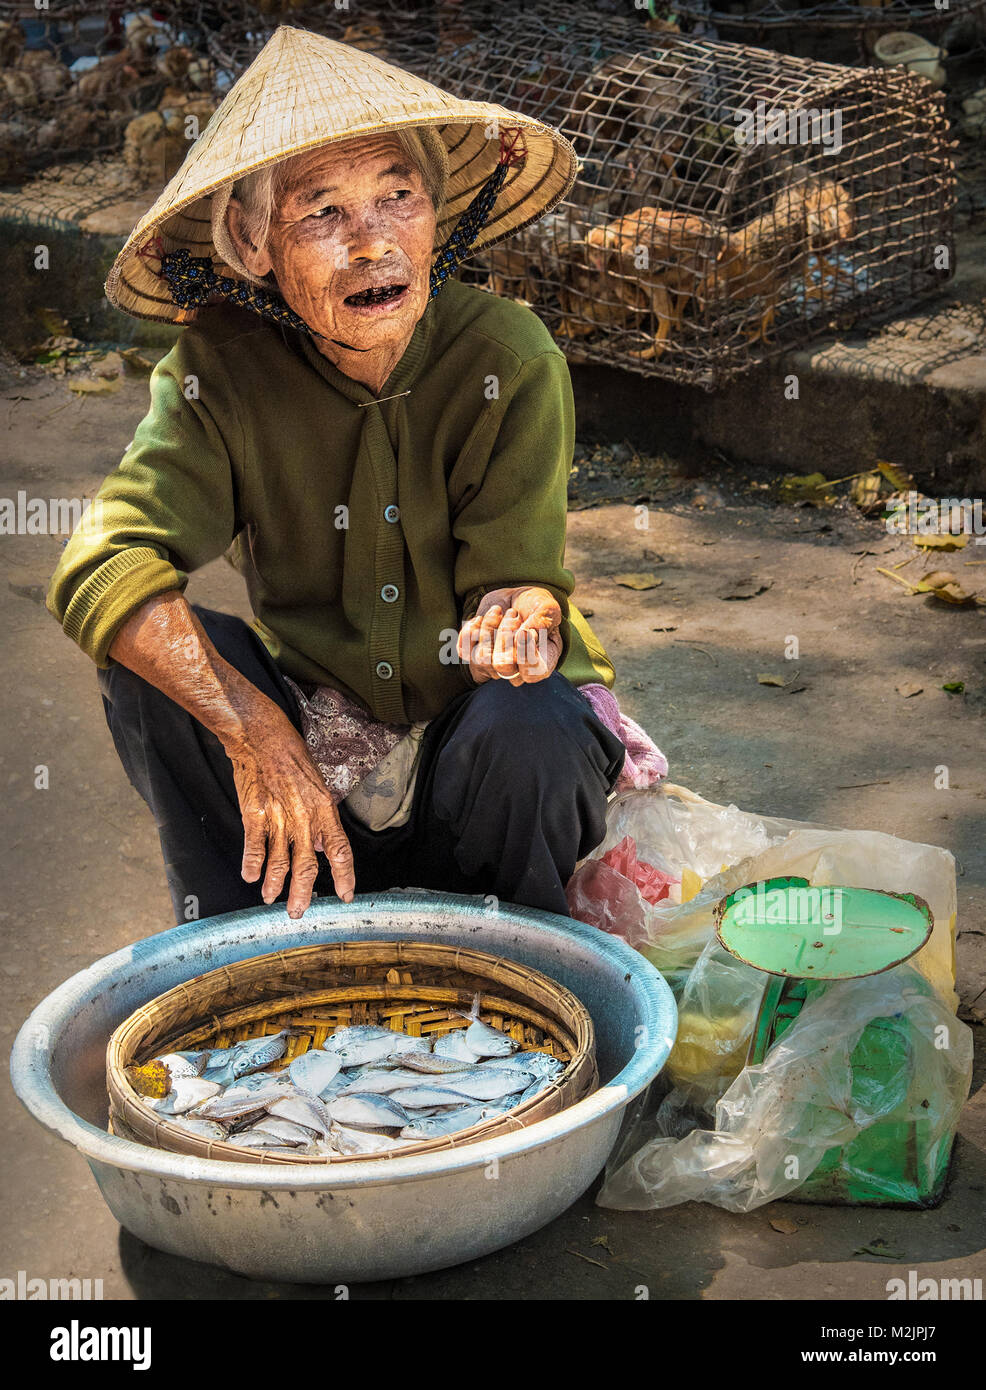 Elderly Vietnamese lady selling fish from a small bowl in the street market of Hoi An  everyday lifeVietnam Asia. Stock Photo